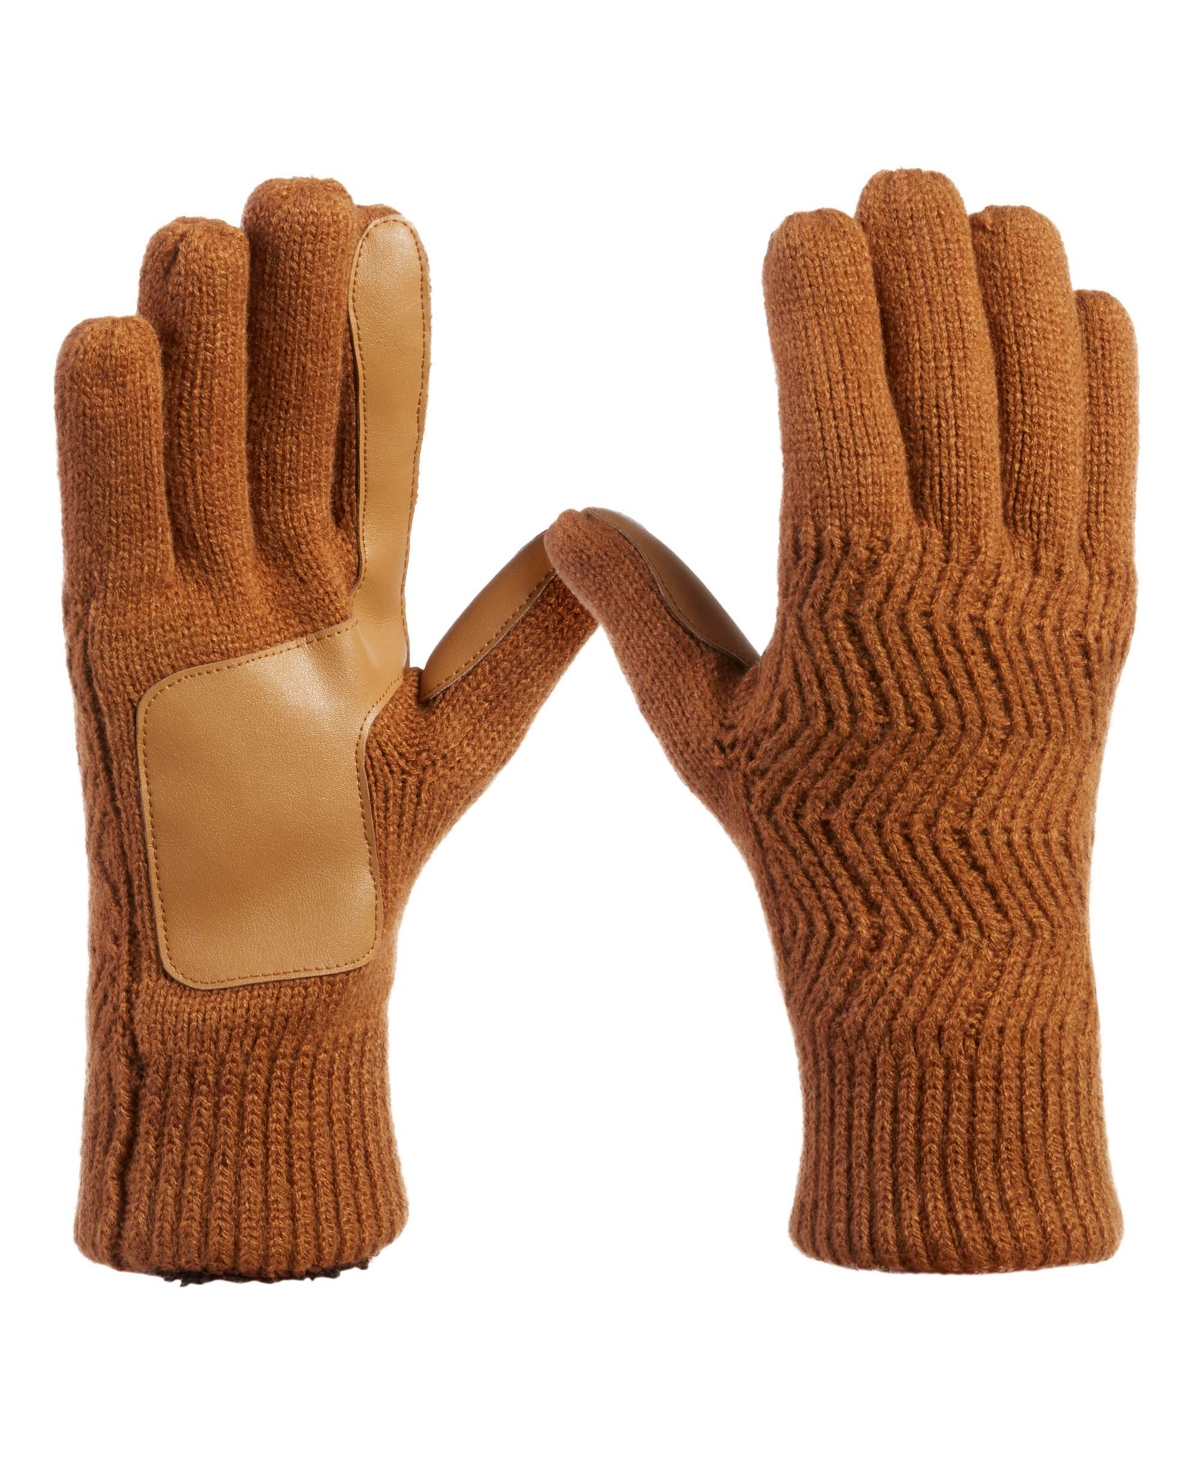 Men's Lined Water Repellent Chevron Knit Touchscreen Gloves - Olive